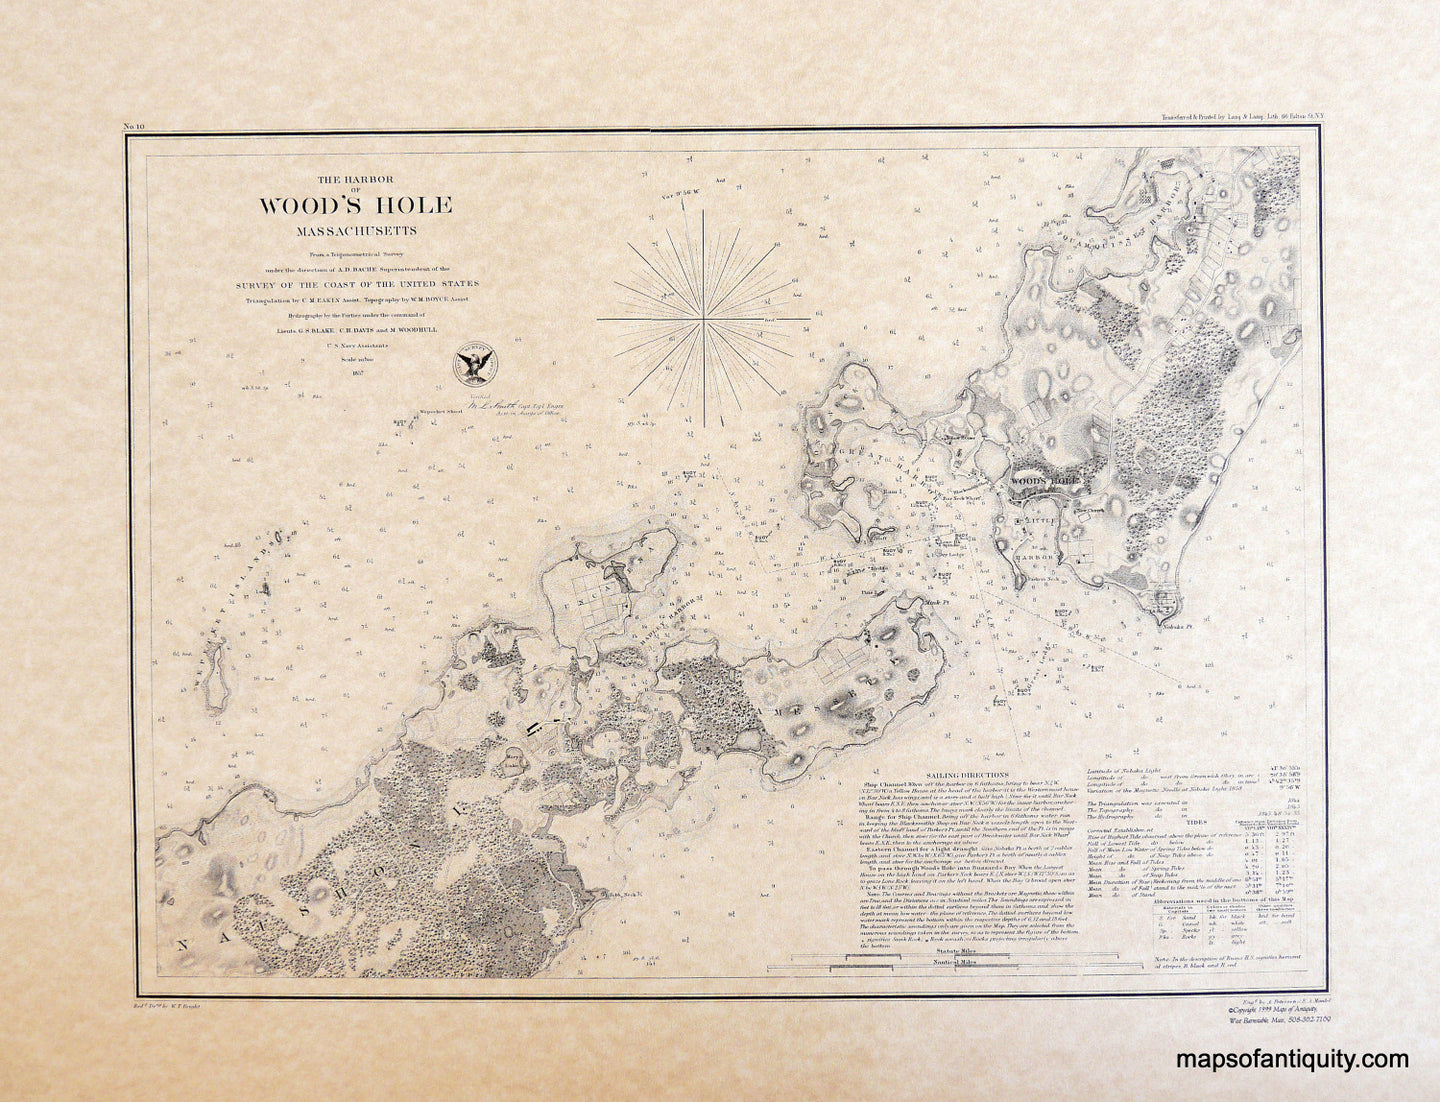 Reproduction-The-Harbor-of-Woods-Hole-Massachusetts.---Reproduction---Reproduction-Coastal-Cape-Cod--U.-S.-Coast-and-Geodetic-Survey--Maps-Of-Antiquity